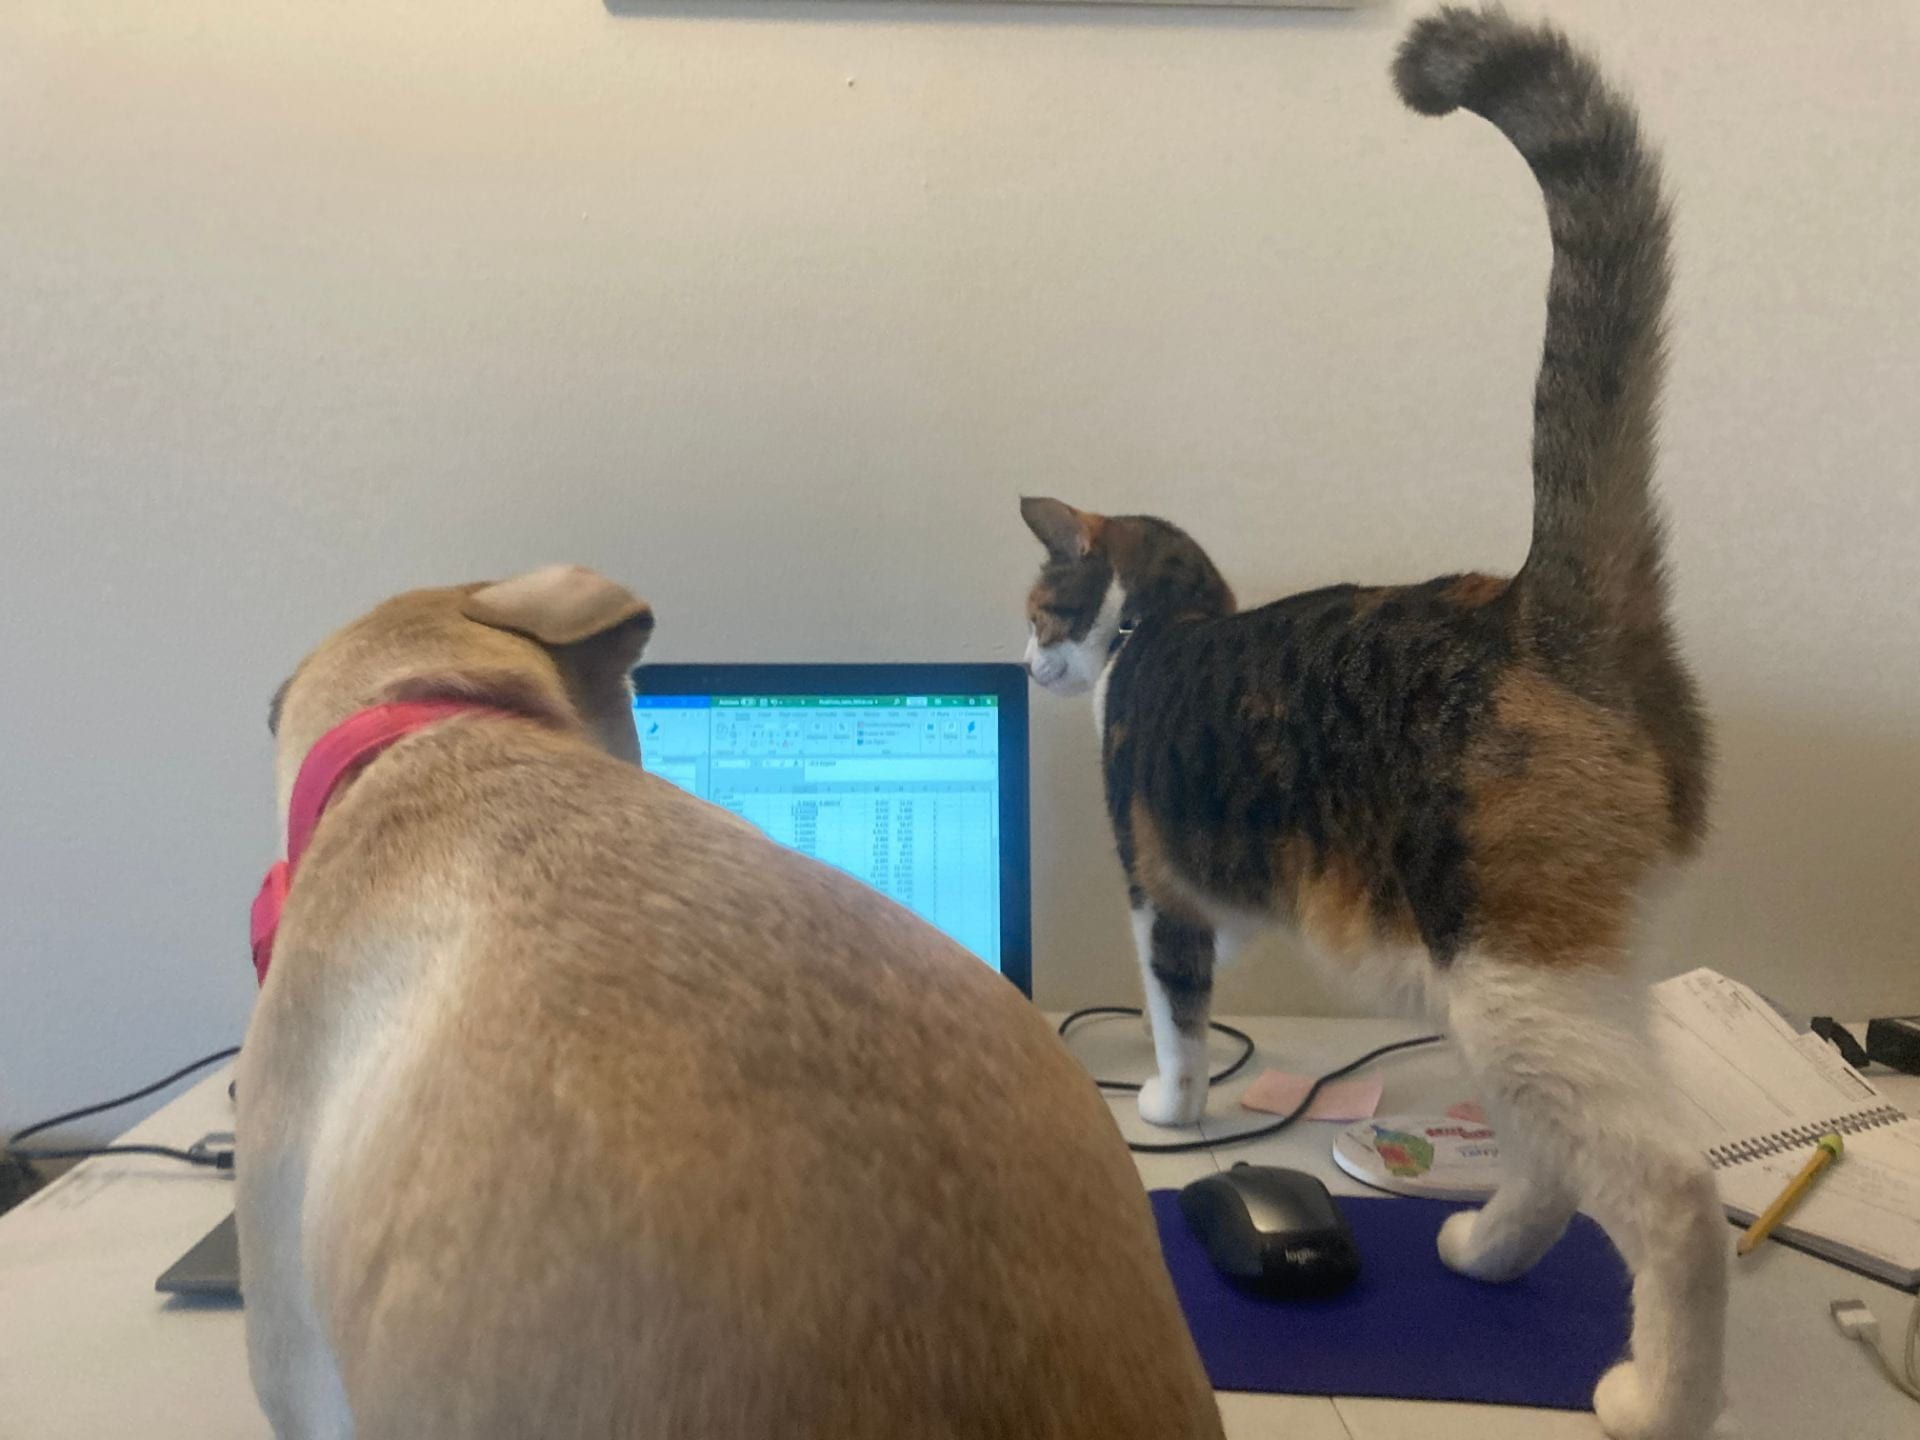 [An inquisitive dog and cat get in the way of a computer screen on a work desk.]